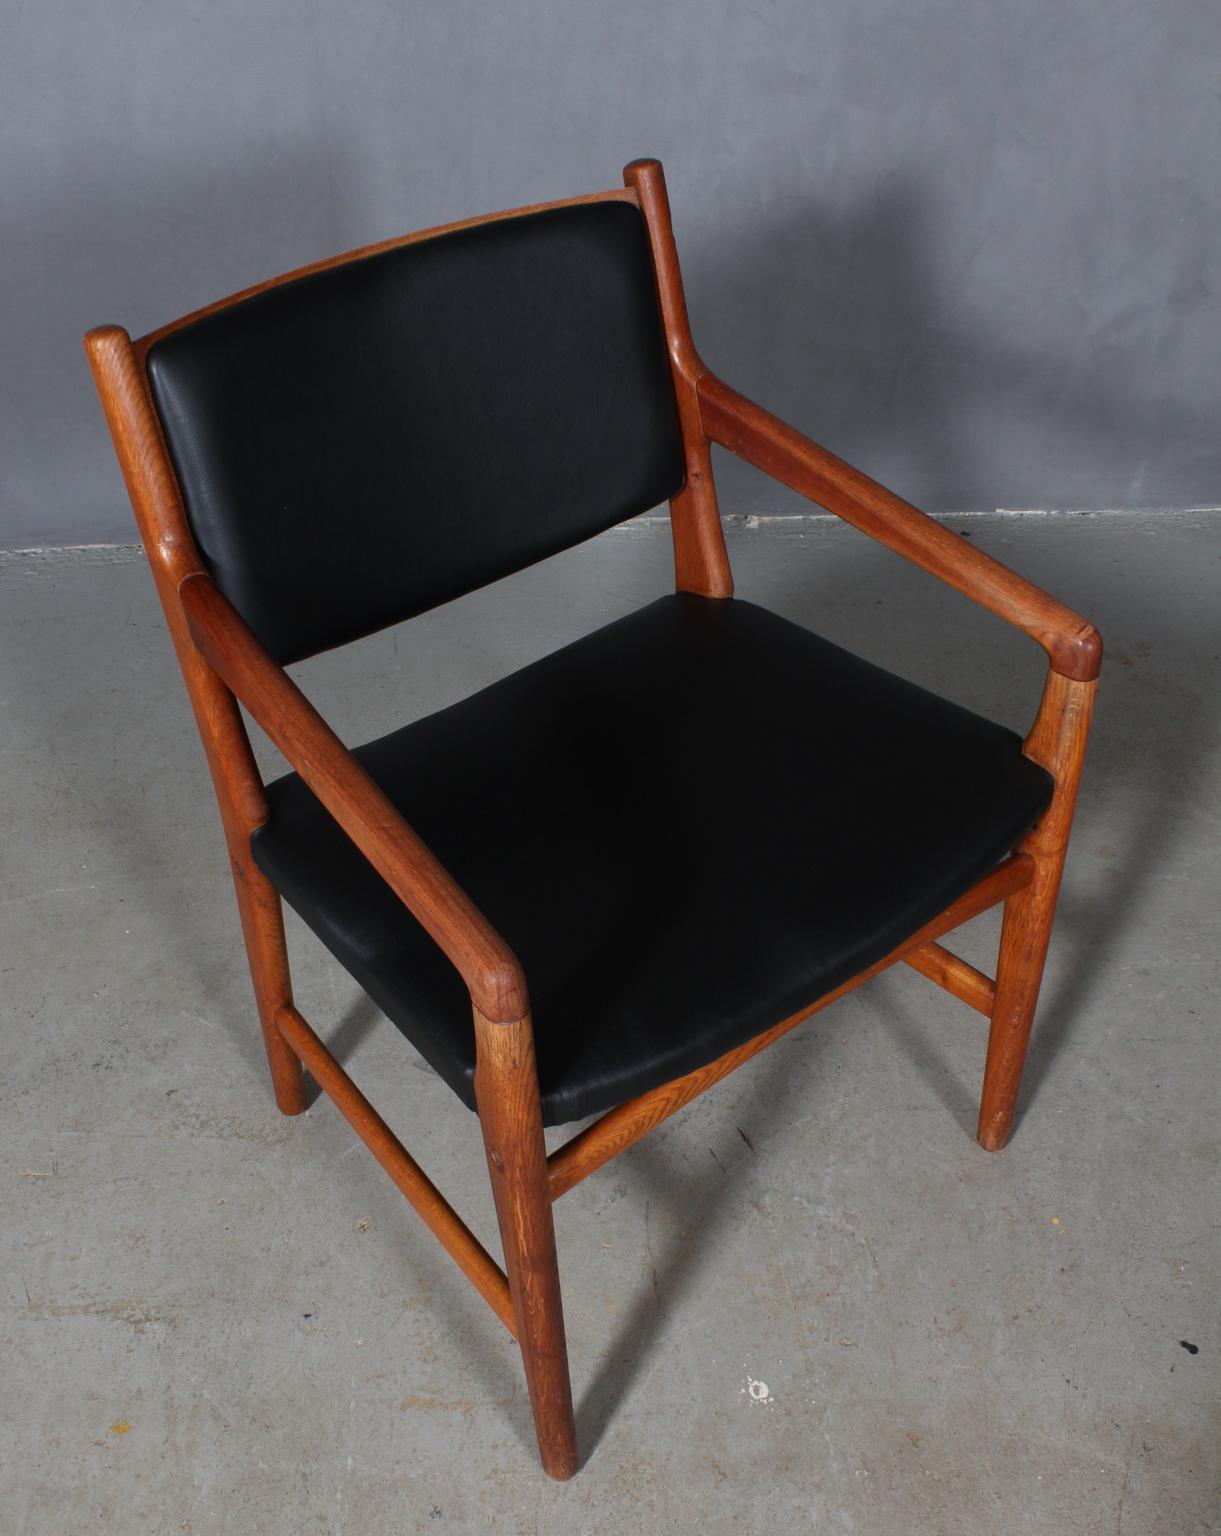 Hans J. Wegner armchair frame of oak and armrests of teak.

Seat and back new upholstered with black aniline leather.

Made by Johannes Hansen in the 1950s for Magasin Du Nords shoe department. Therefore there are holes in the chair for mounting